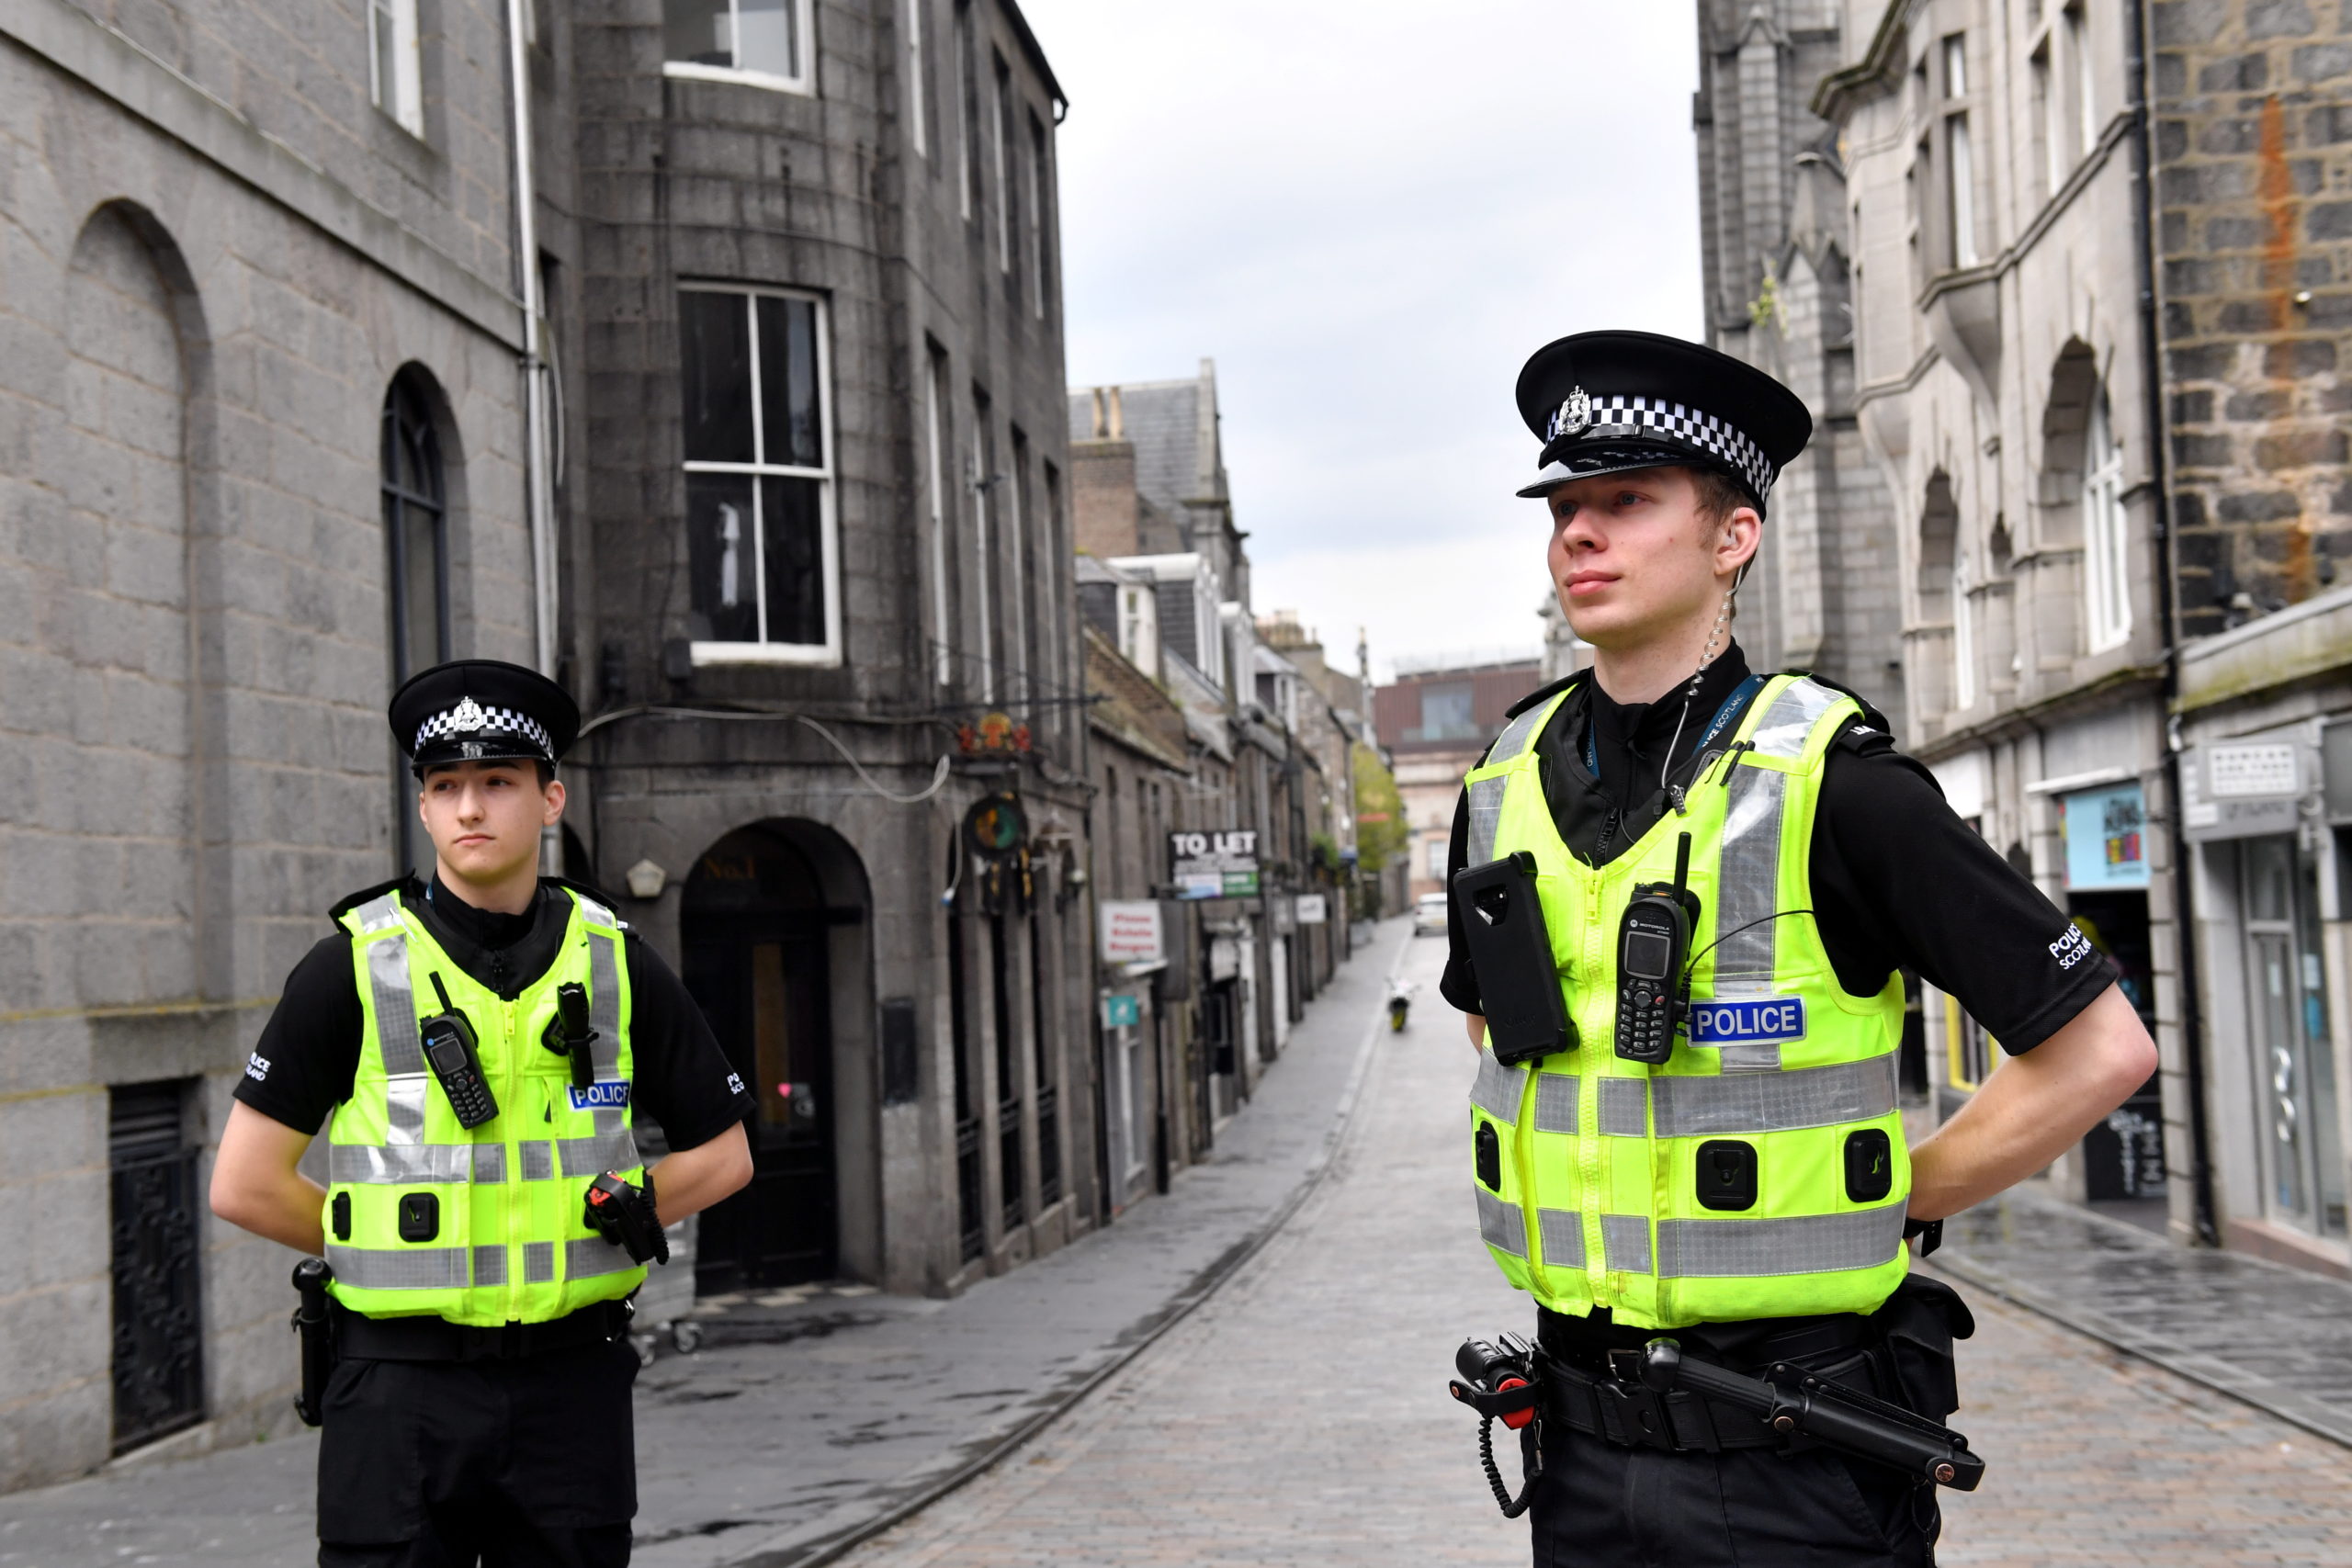 Police officers patrol Aberdeen city centre during the Coronavirus lockdown. Picture by Kami Thomson